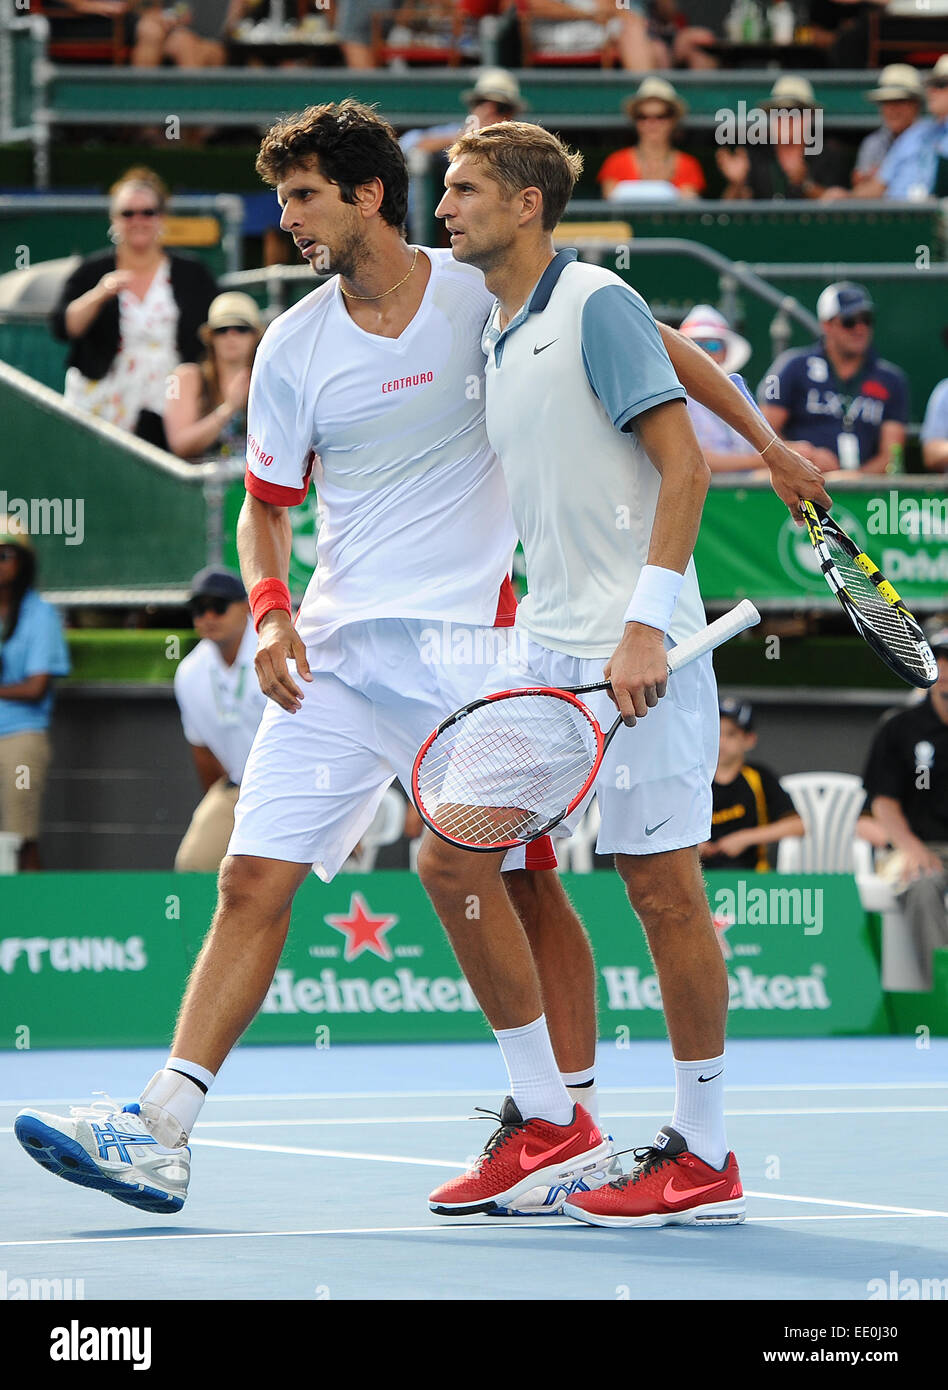 Auckland, New Zealand. 12th Jan, 2015. Brazilian player Marcelo Melo and  Max Mirnyi from Belarus after winning their doubles match at the Heineken  Open. ASB Tennis Centre, Auckland, New Zealand. Monday 12